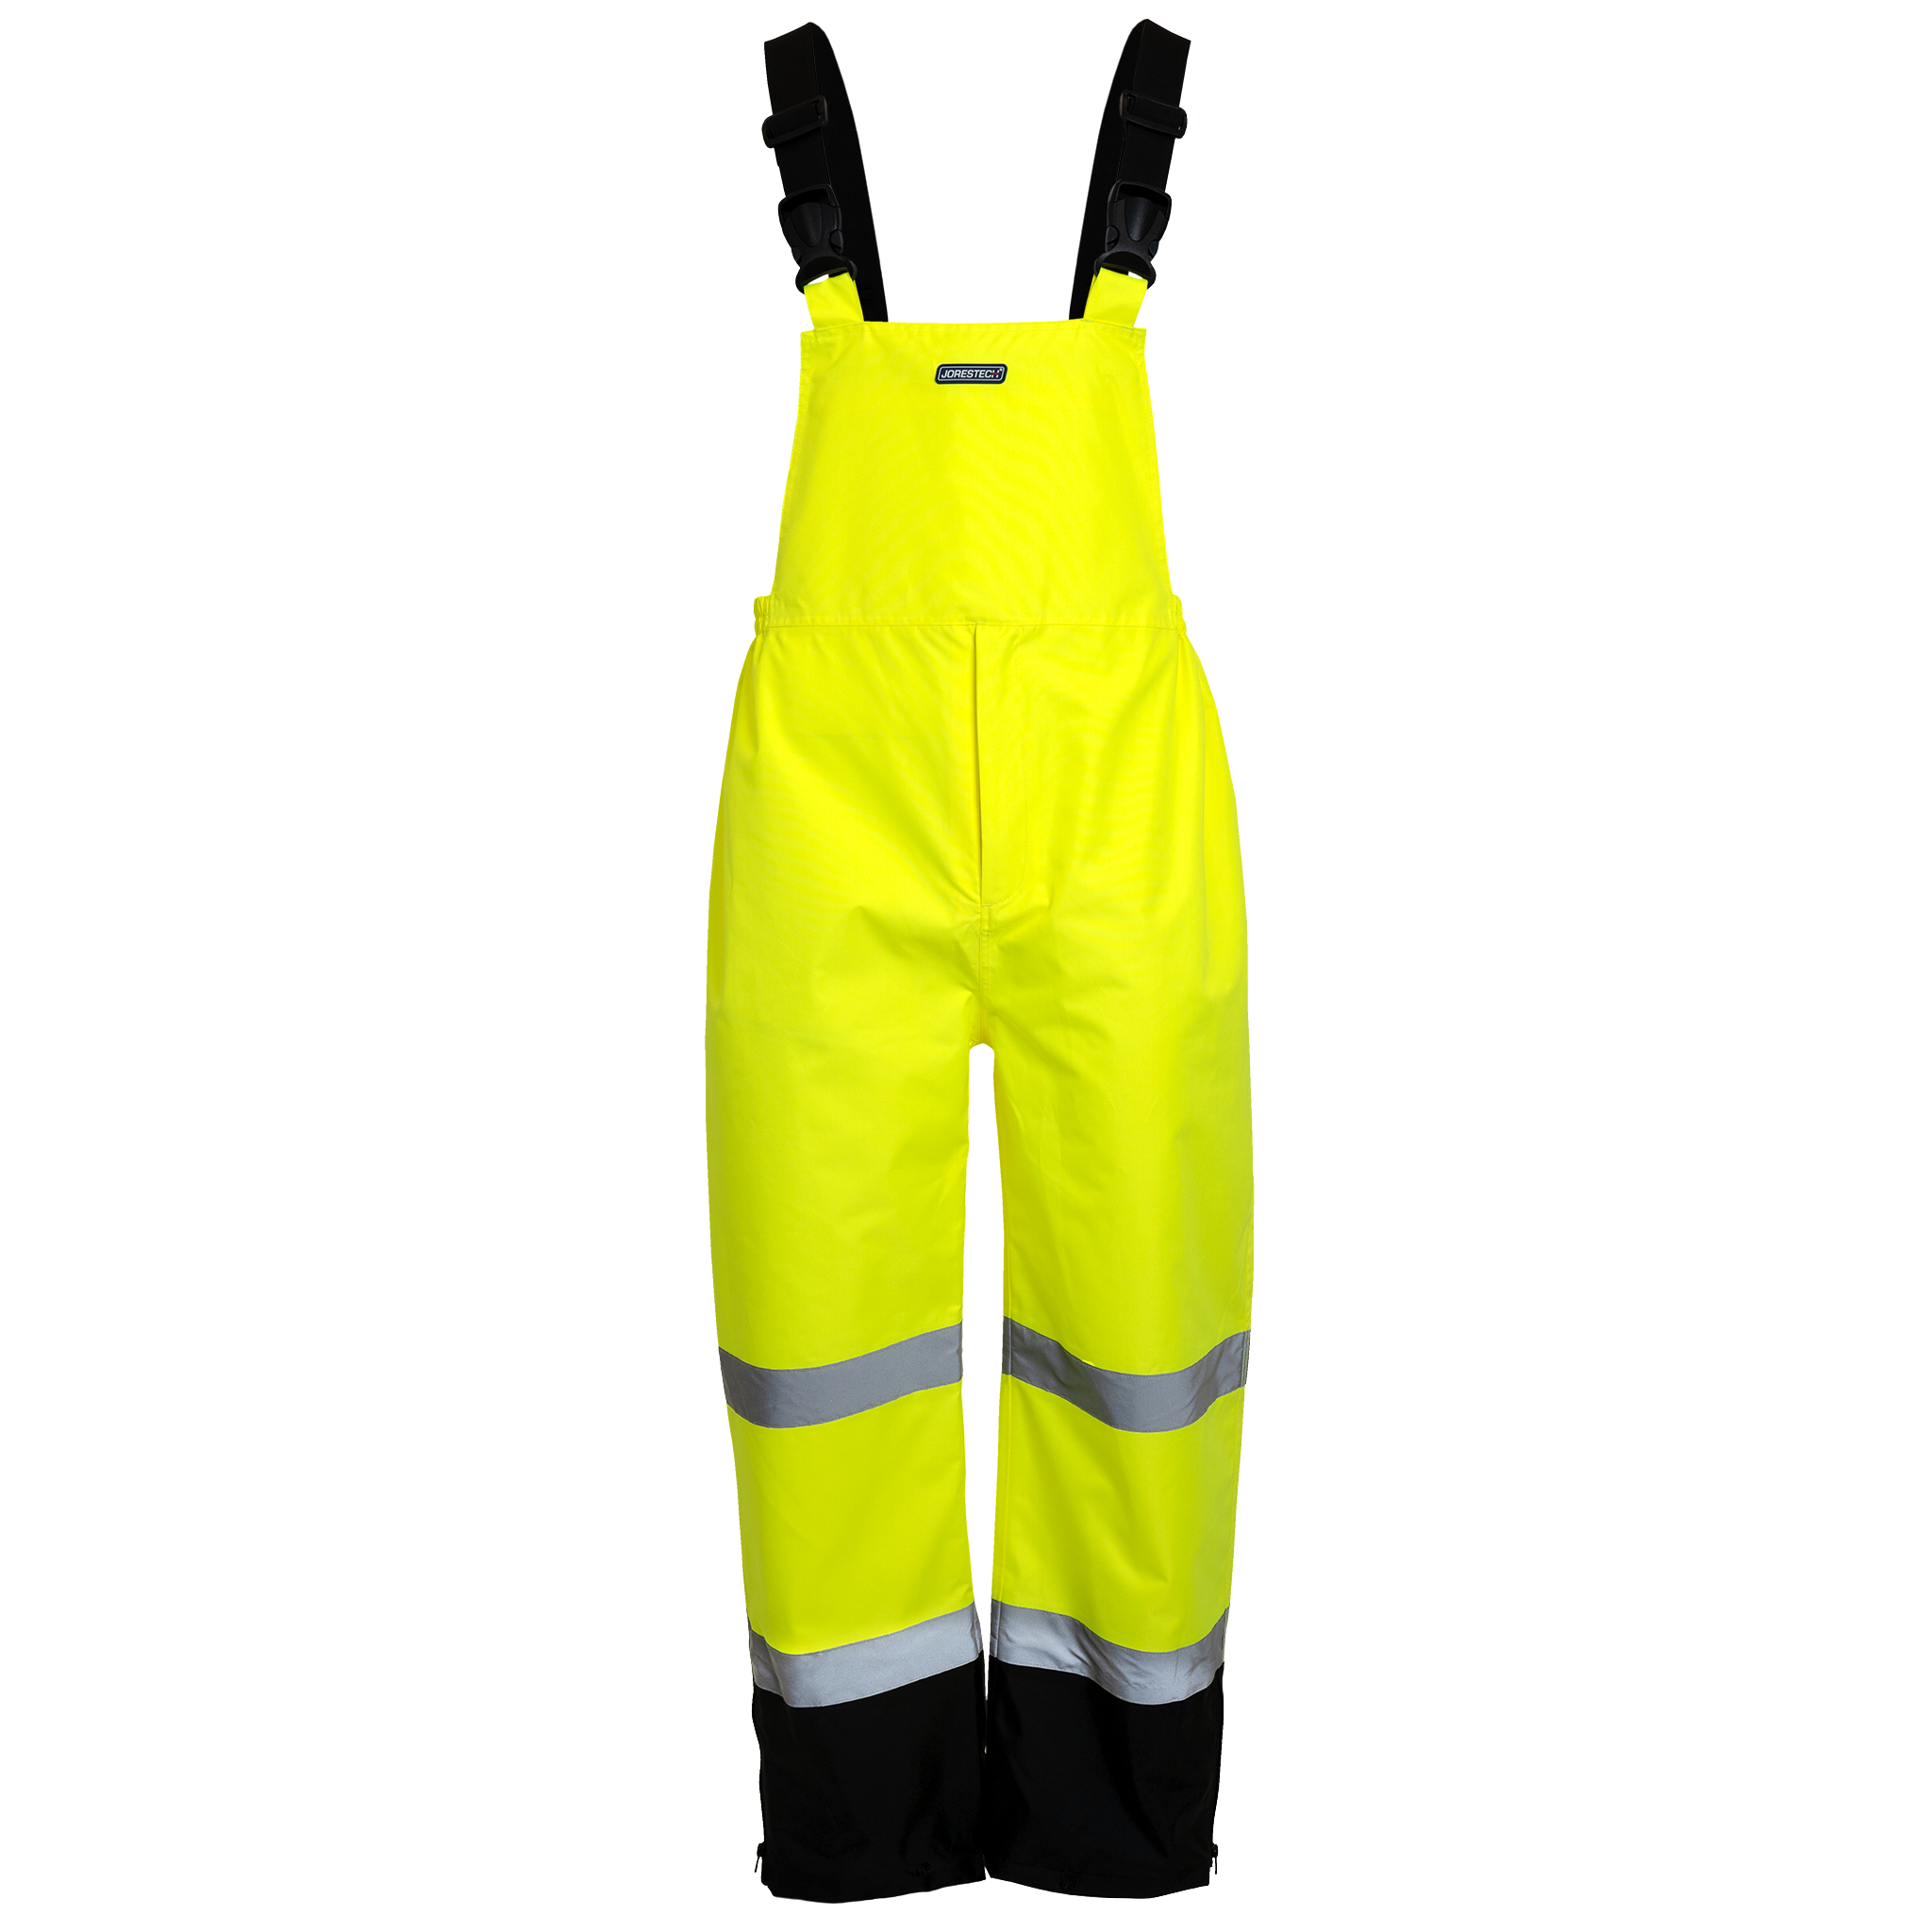 High Visibility Waterproof Safety Overall Pants with Reflective Stripes